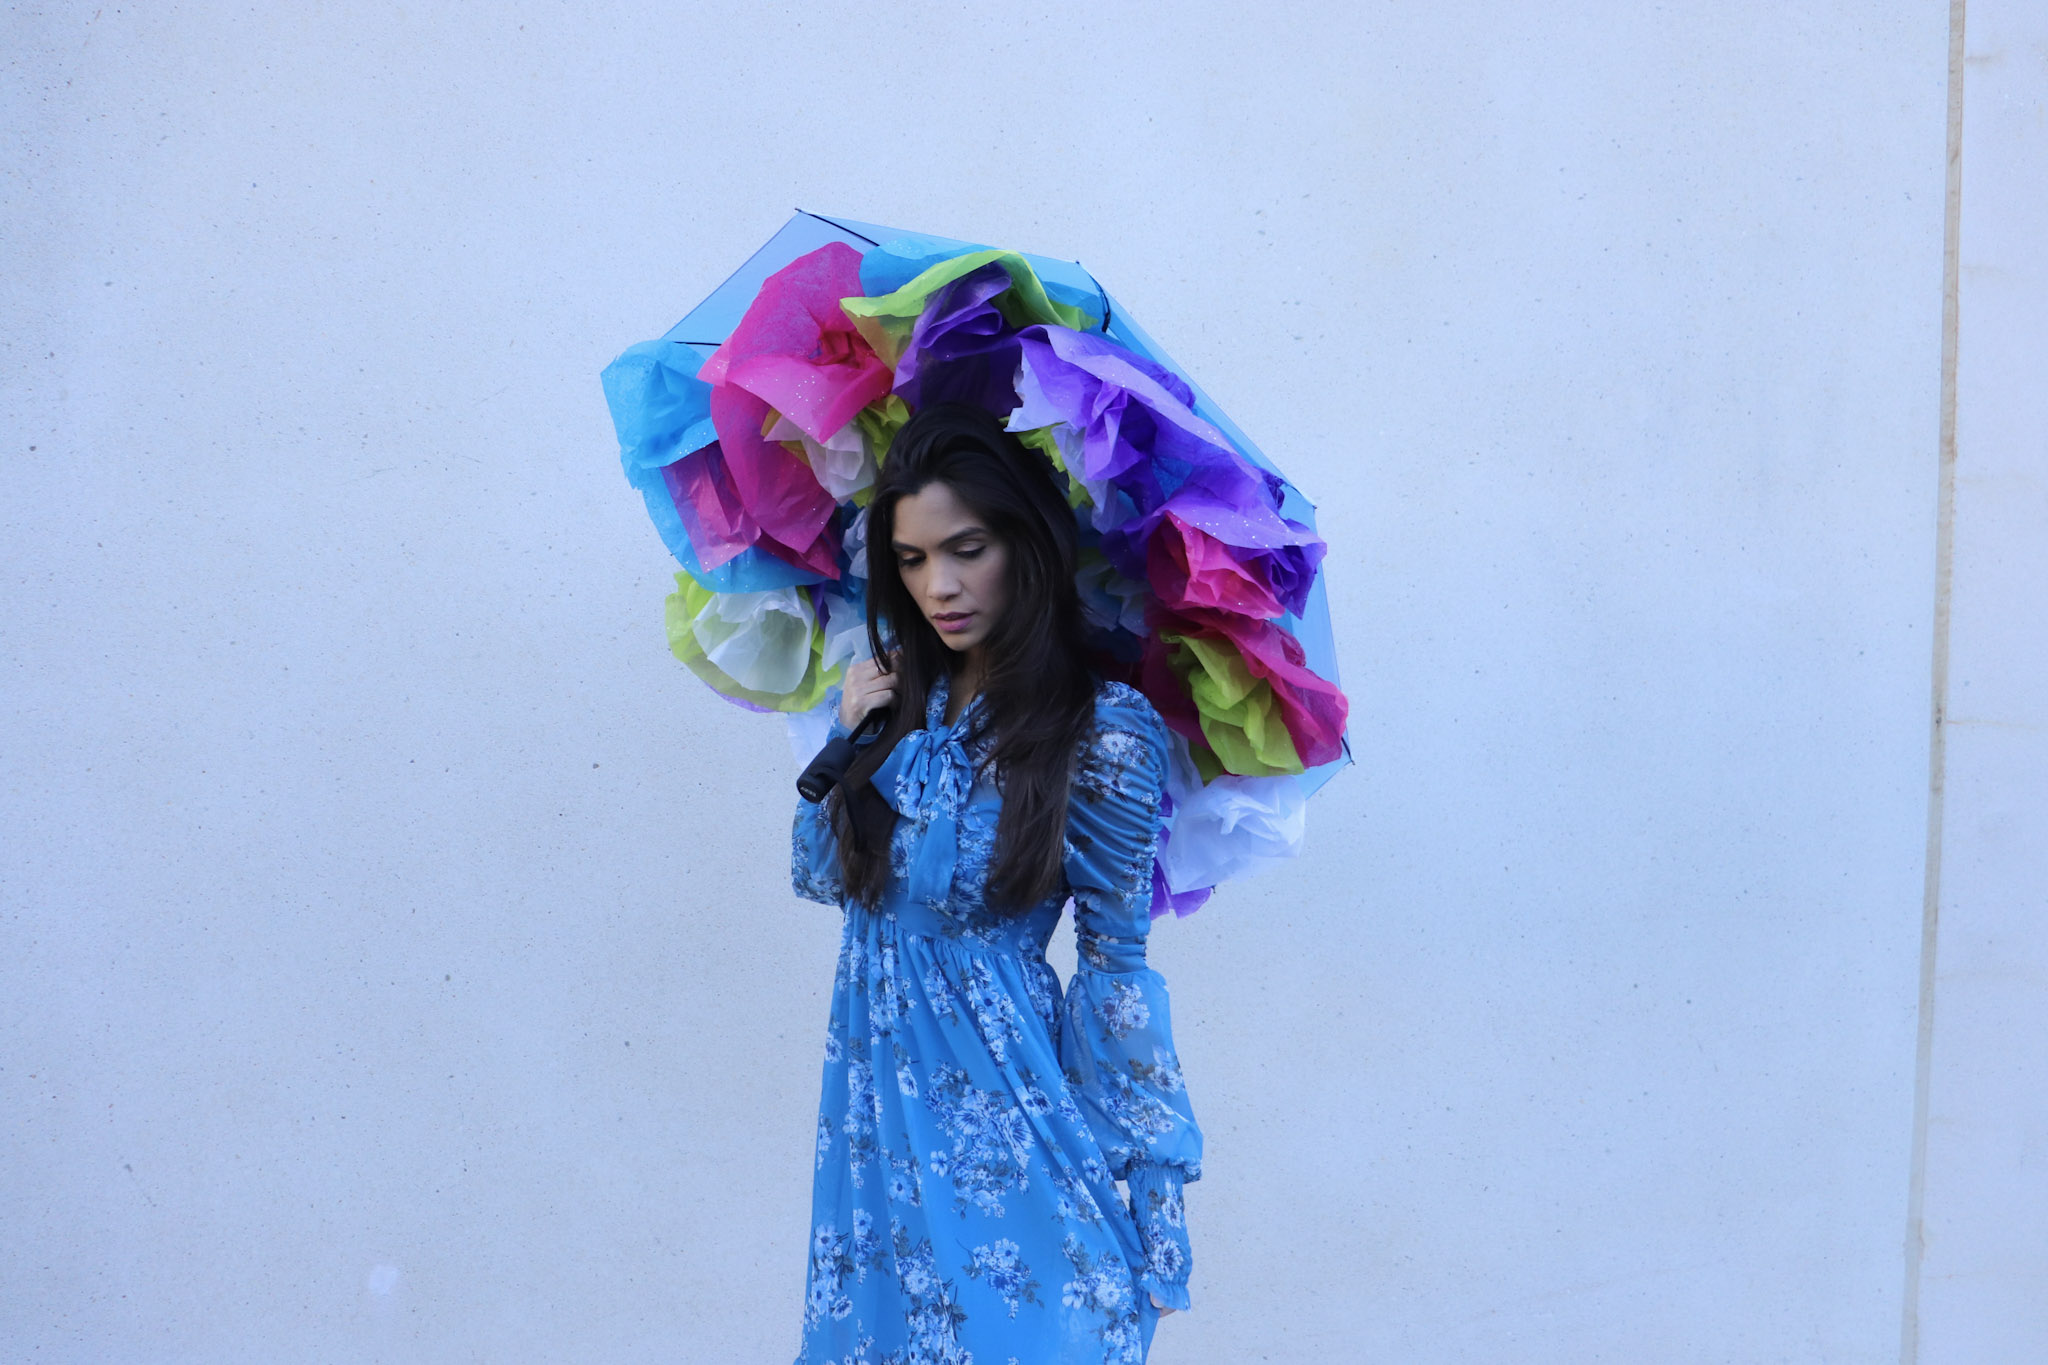 How to Make Flowers Out of Tissue Paper, Tissue Paper Craft, Tissue Paper Crafts, Giant Flowers out of Tissue Paper, Charlotte Artist, River Island Blue Floral Neck Tie Midi Dress, River Island Blue Floral Neck Tie Midi Dress